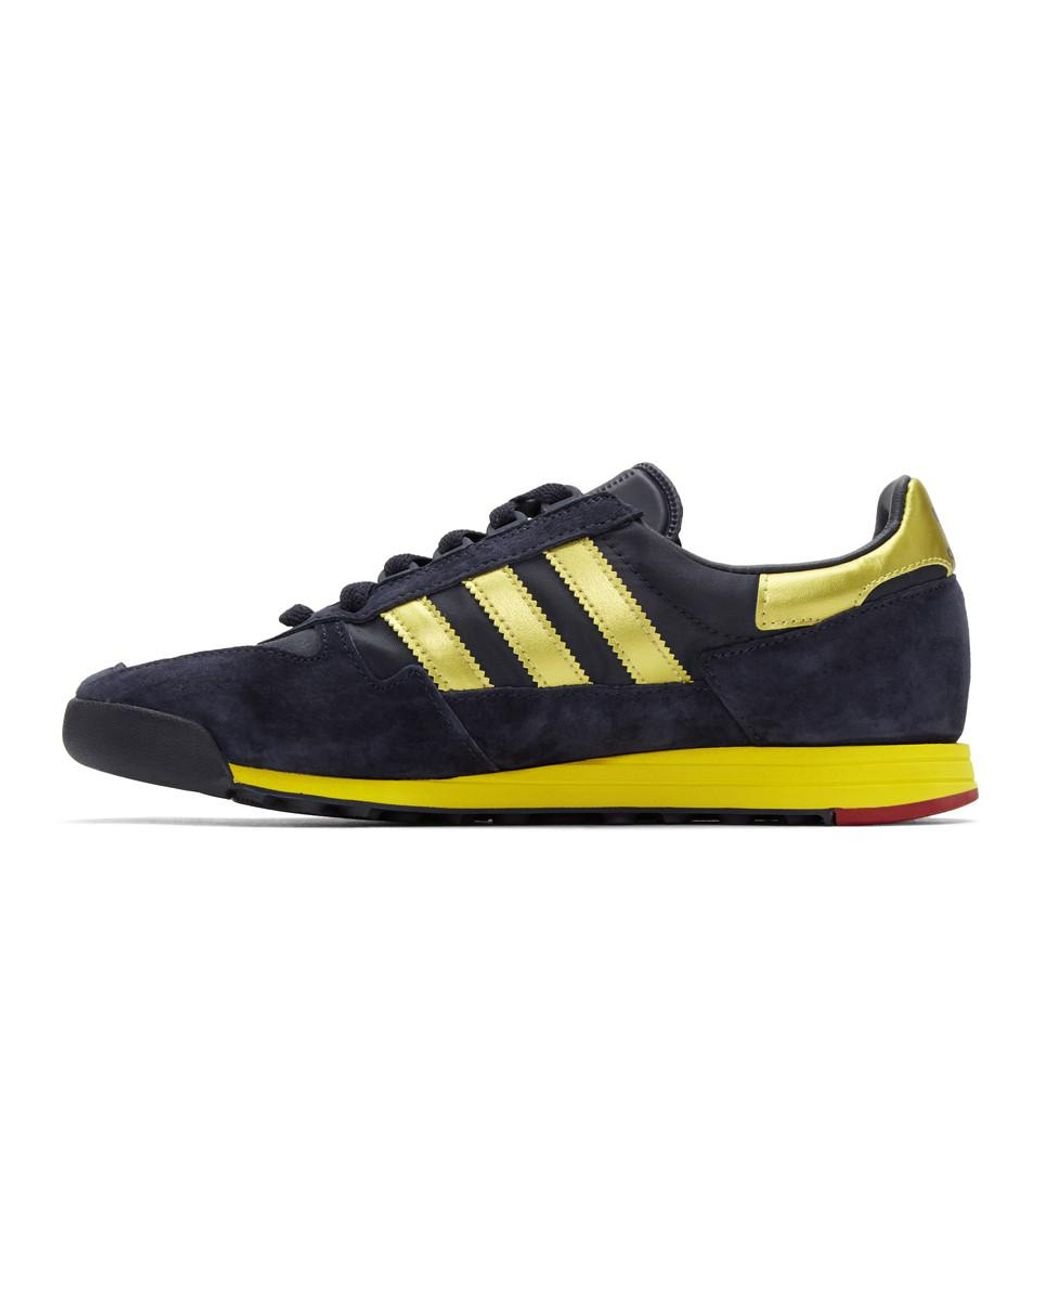 adidas Originals Navy And Gold Sl 80 Spzl Sneakers in Blue for Men Lyst